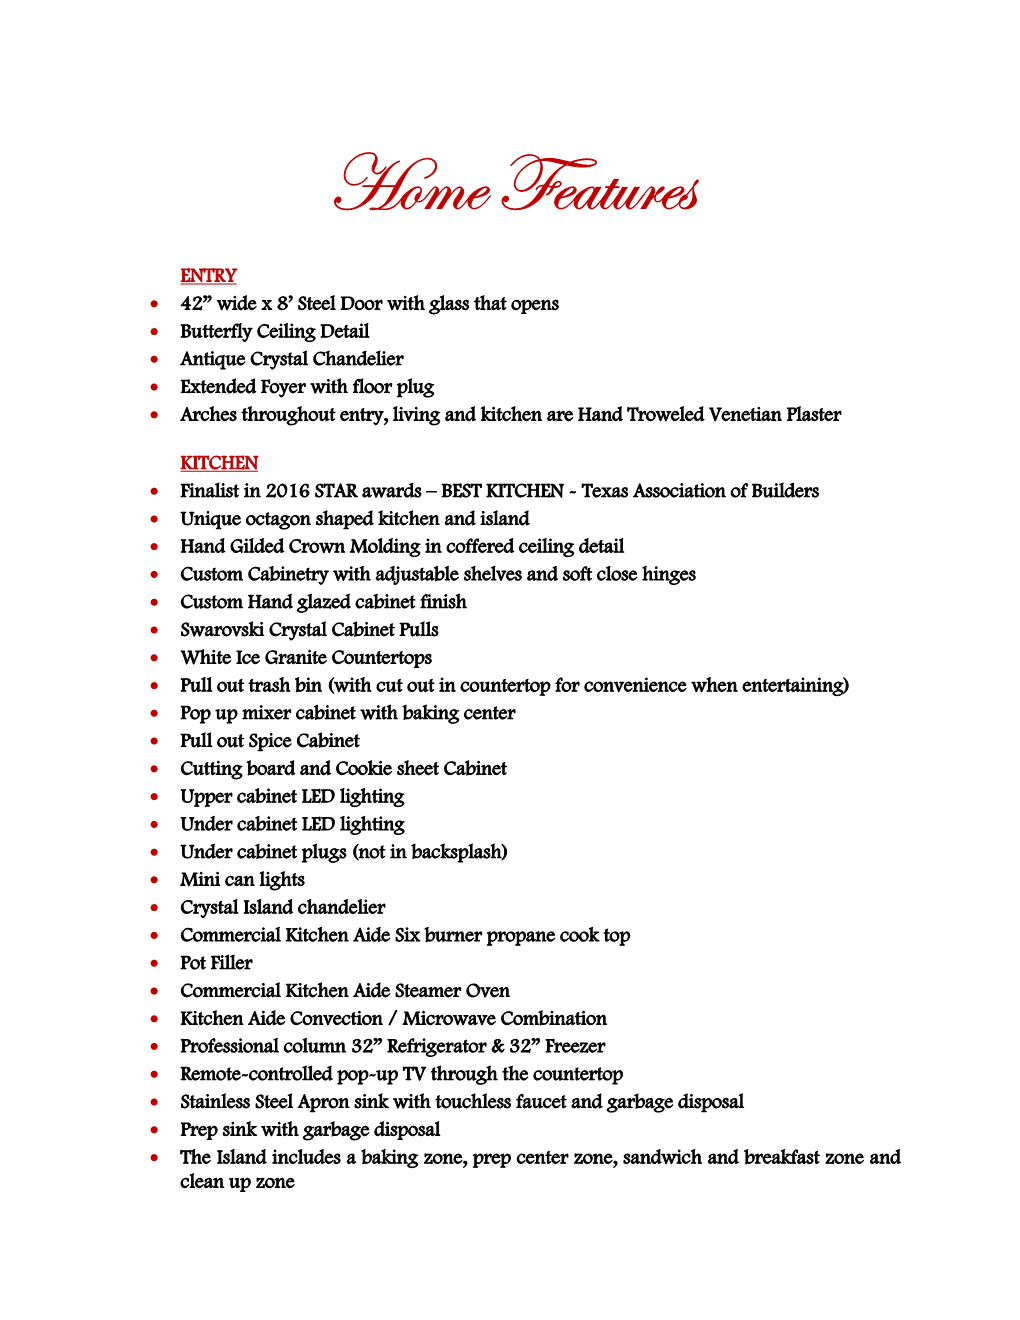 Home Features